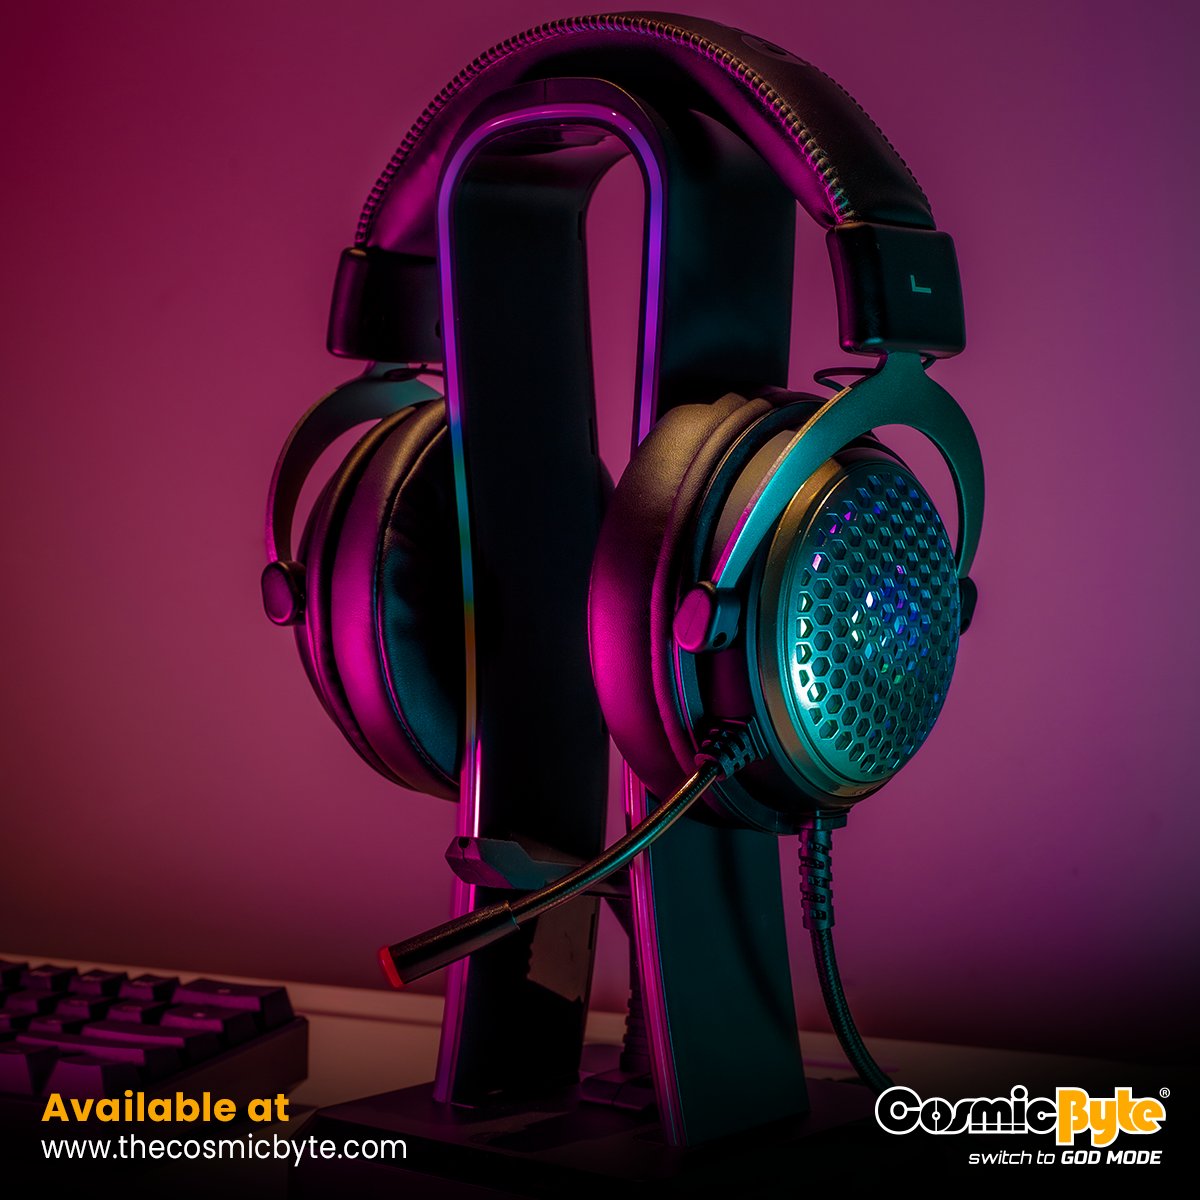 Cosmic Byte Get The Immersive Gaming Experience With Cosmic Byte S Equinox Ceres 7 1 Surround Sound Gaming Headphone Take Your Rgb Gaming Experience Up A Notch With The True Rgb Colors